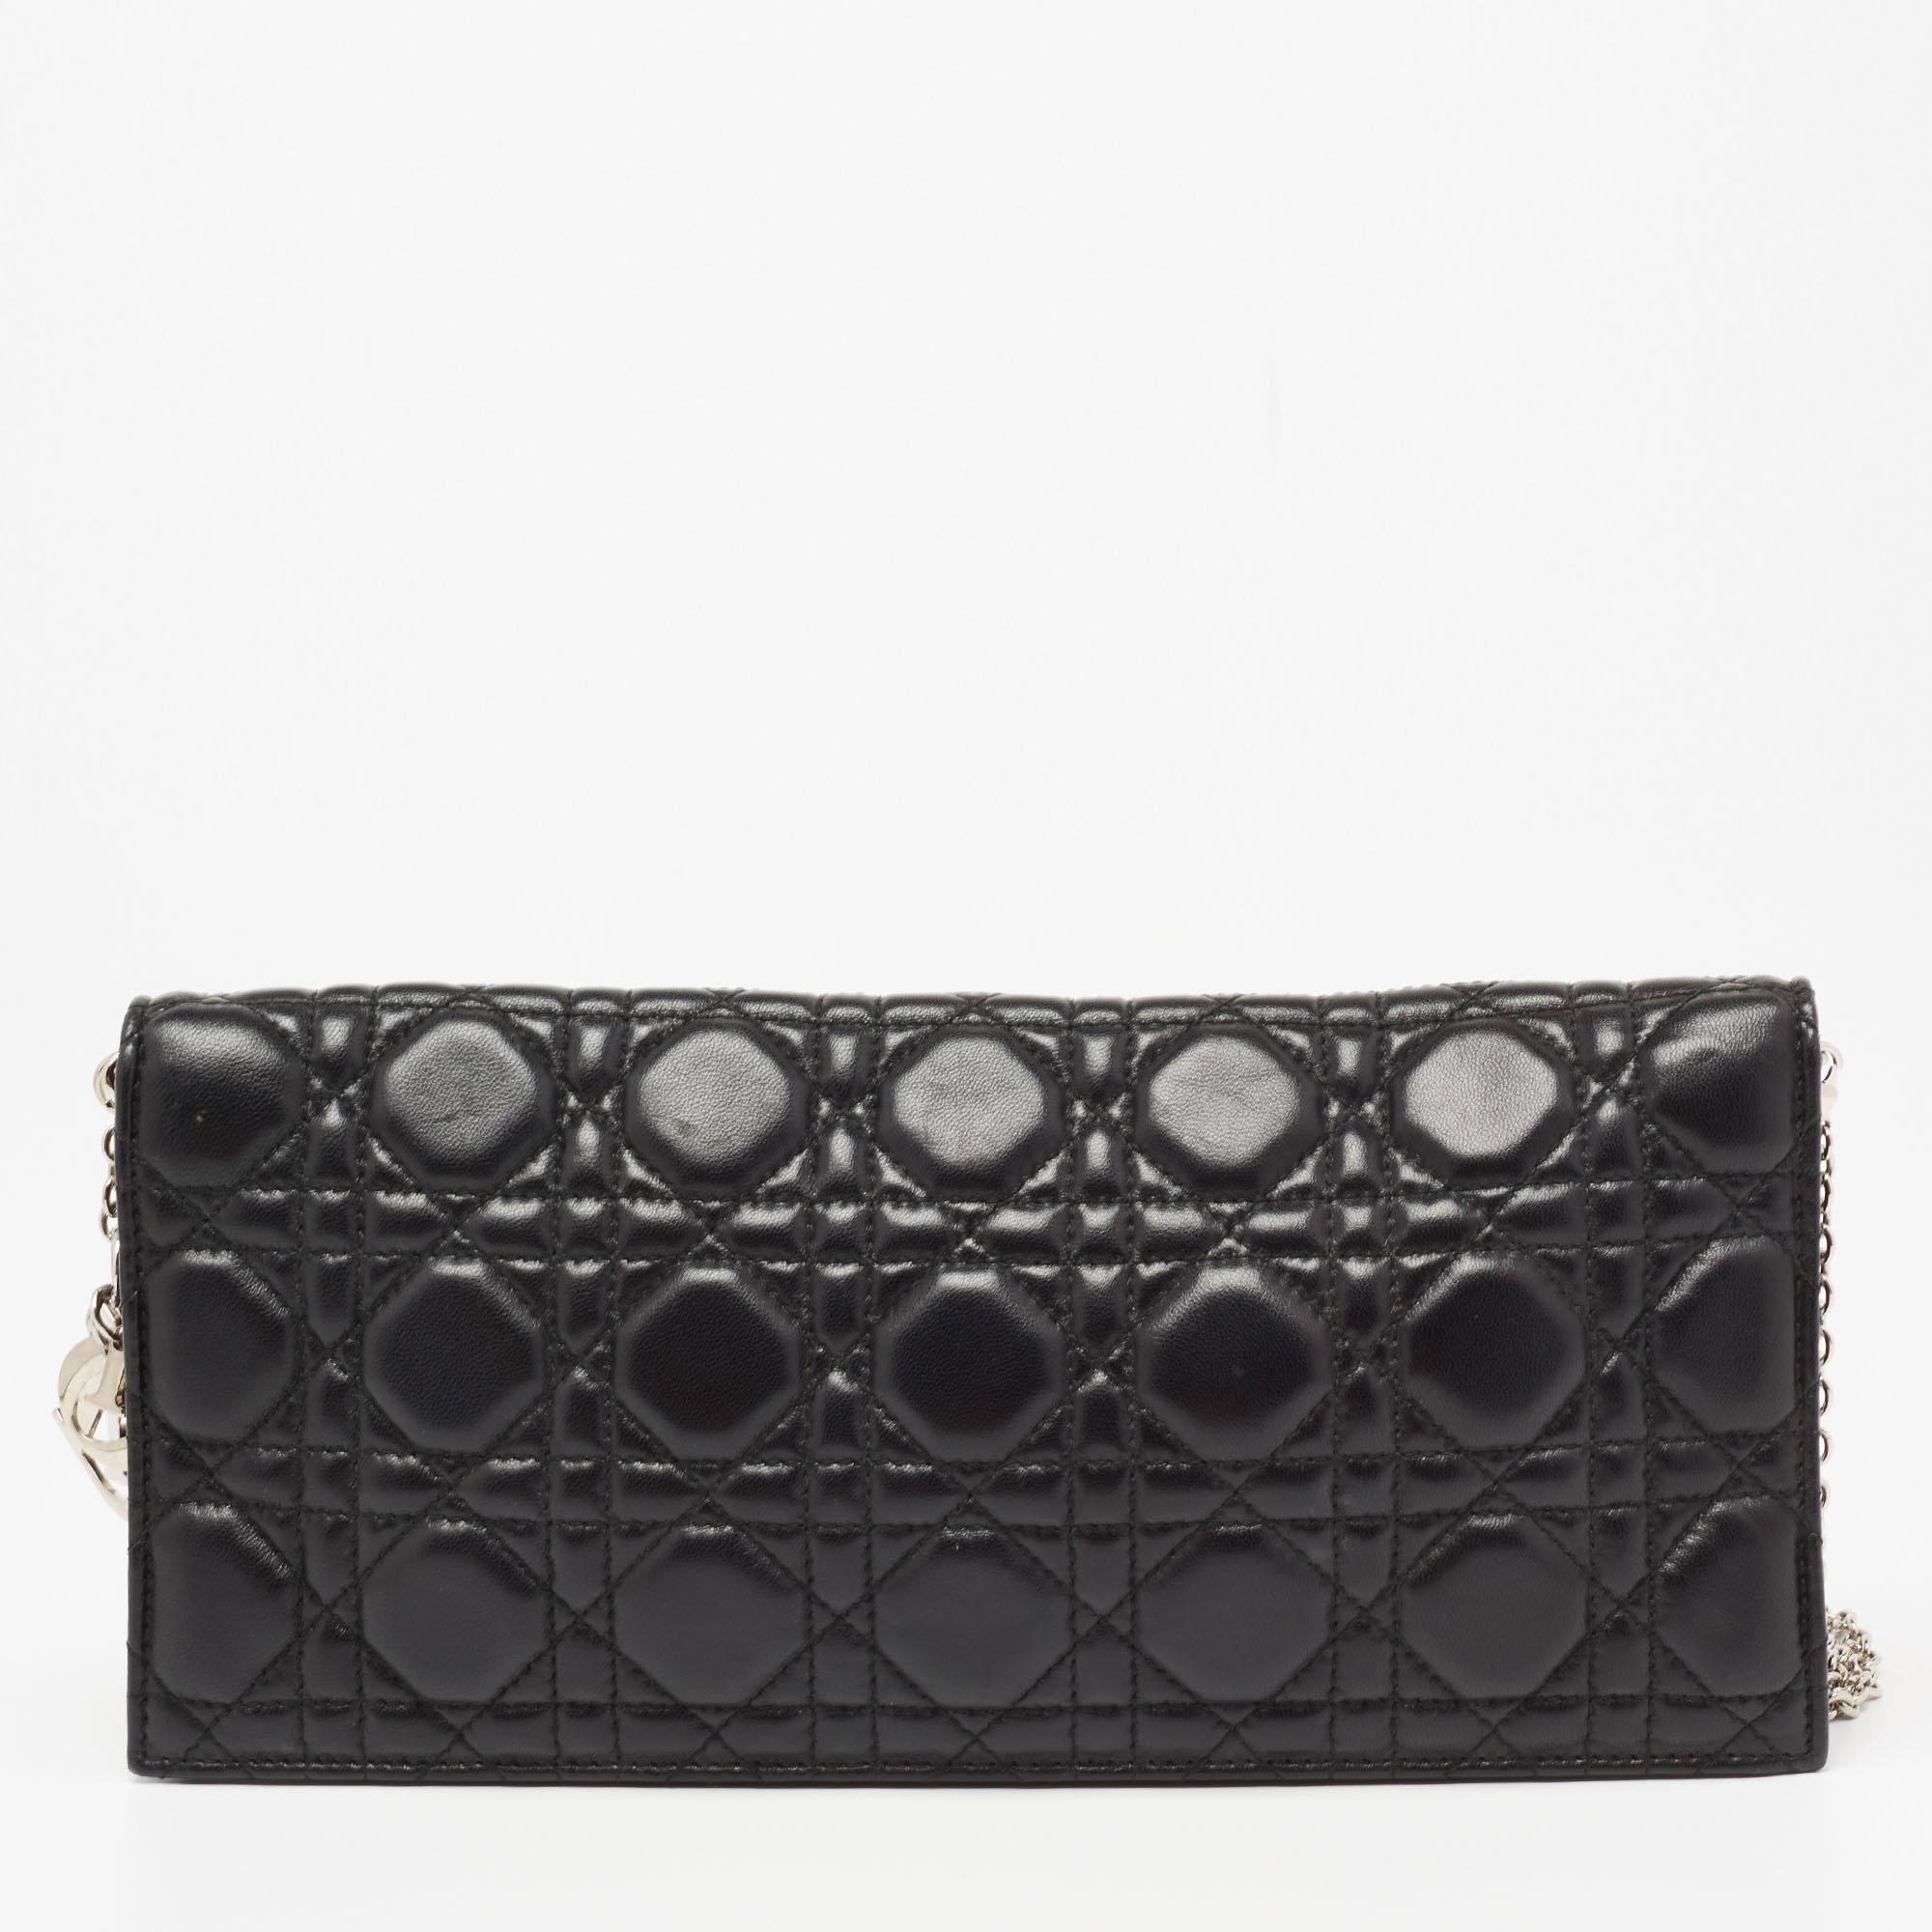 This Lady Dior chain clutch from the House of Dior is a stylish creation that is exceptionally well-made. Crafted from black Cannage quilted leather, this clutch is embellished with silver-tone hardware. It unveils a fabric-lined interior, which can